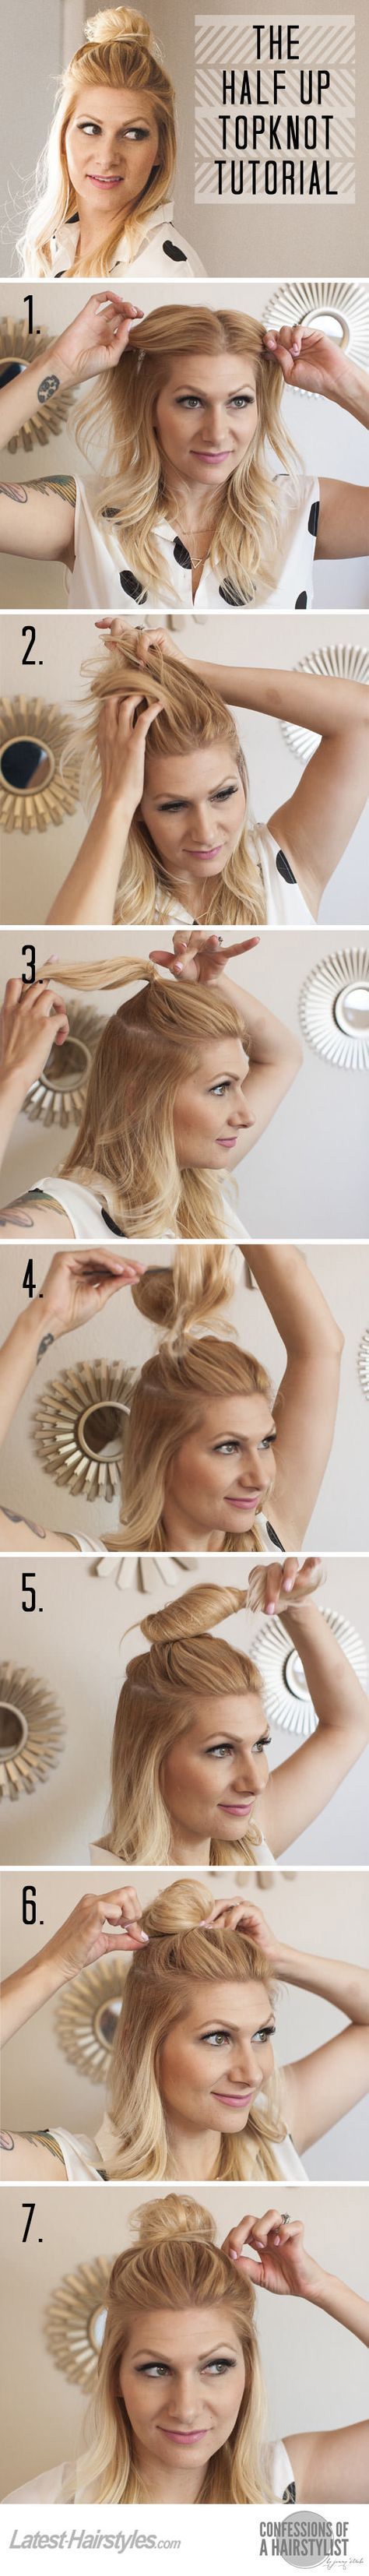 The year of the sock bun happened in 2012/2013. Braids were inescapable in 2014. In 2015, the super trendy lob ruled all. I predict that 2016 will be the year of half-up/half-down hairstyles, and I really hope that I’m right. In case you haven’t noticed, the half-up top knot has been everywhere for the last … Read More: 